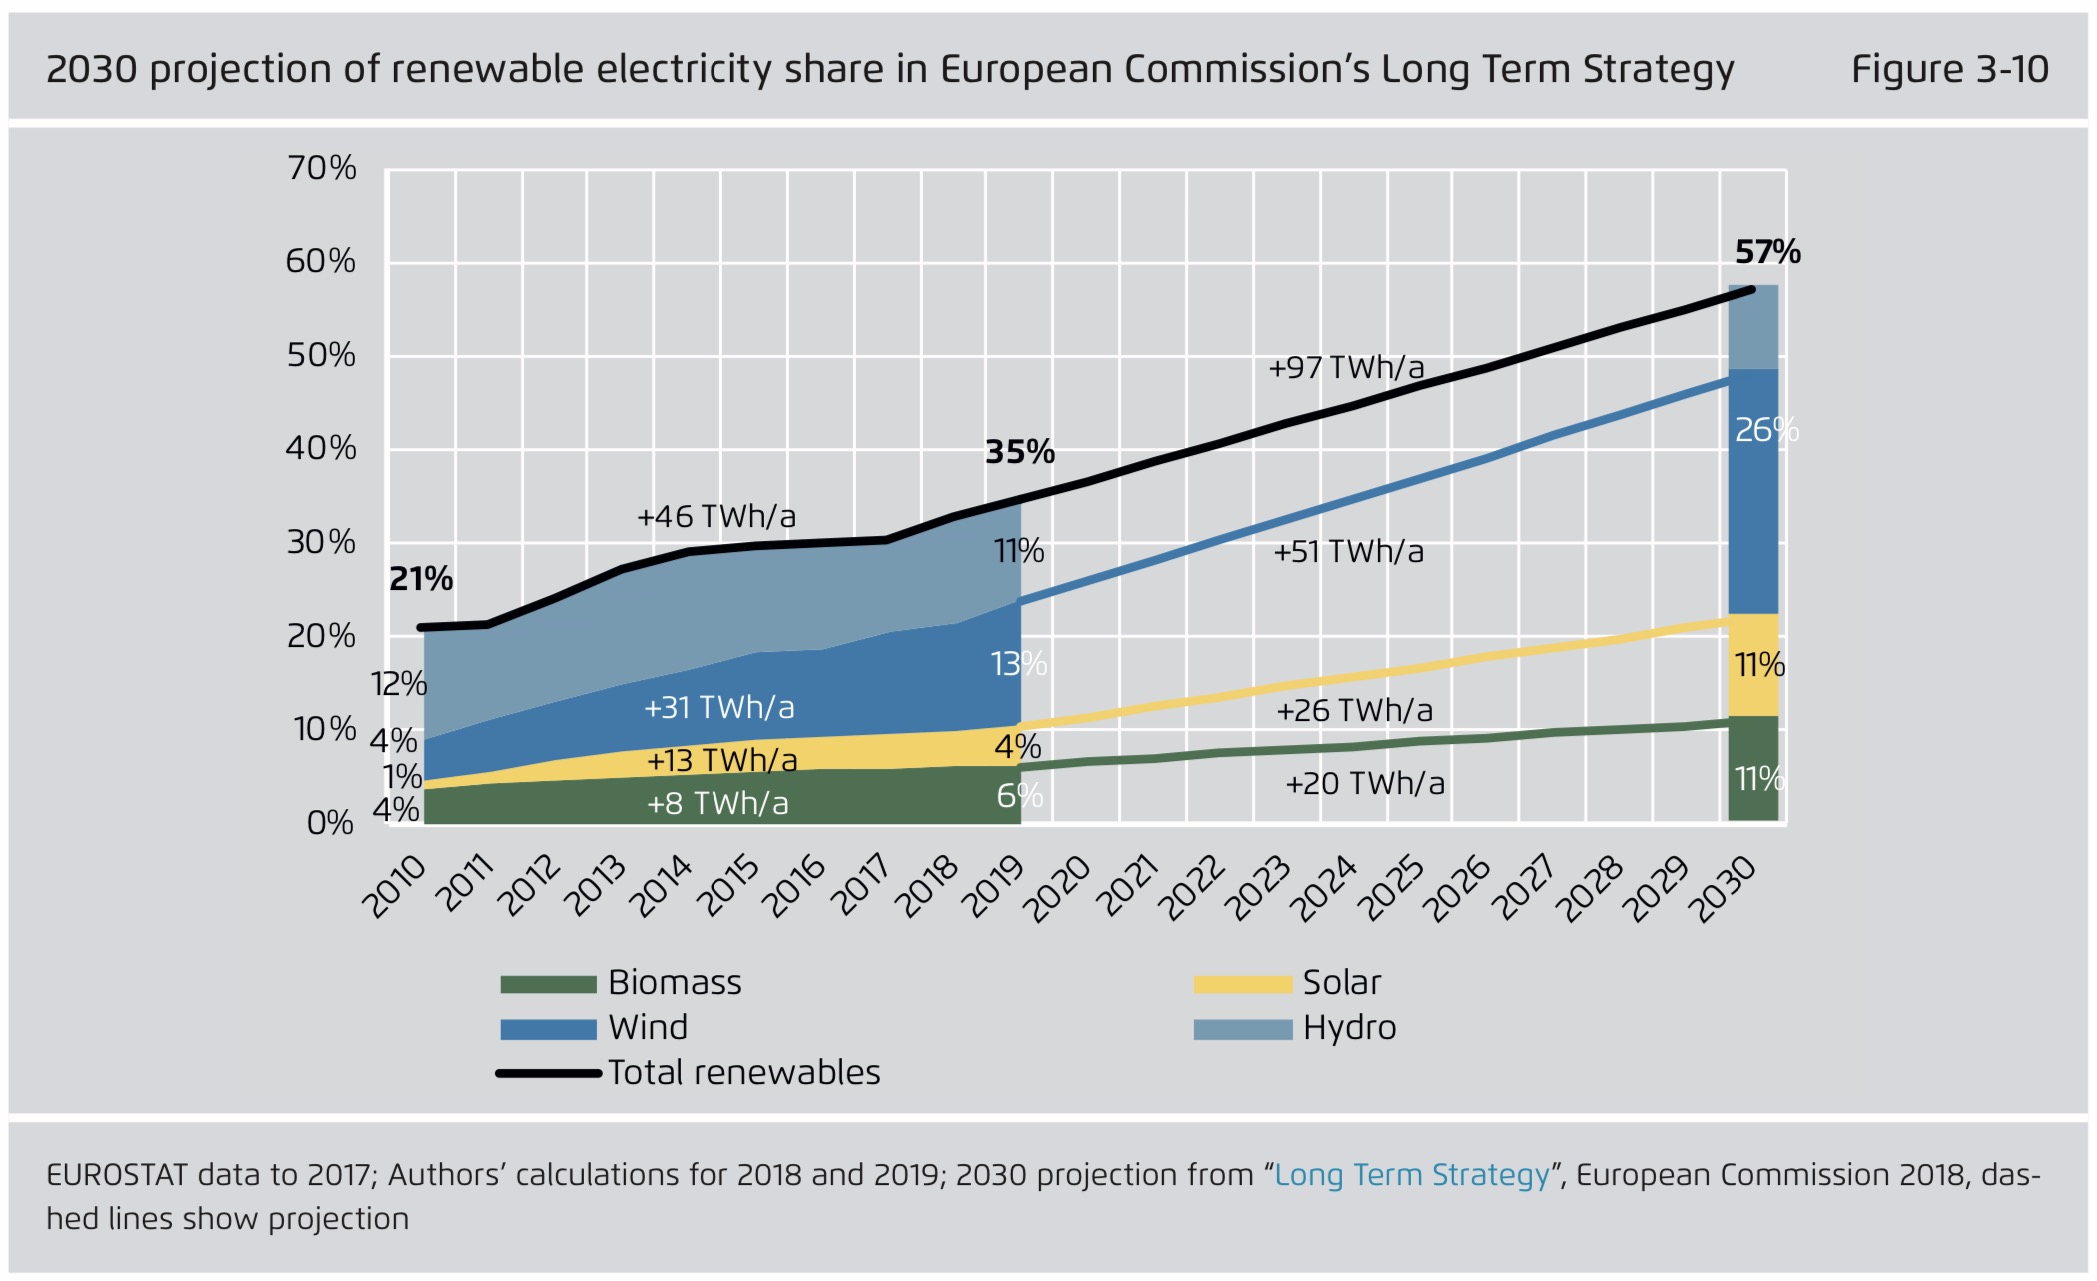 The infographic shows that in the Commission’s modelling, wind more than doubles from 13% in 2019 to 26% 2030, and solar almost triples from 4% to 11%. Biomass implicitly almost doubles its share from 6% to 11%, assuming hydro generation stays unchanged.